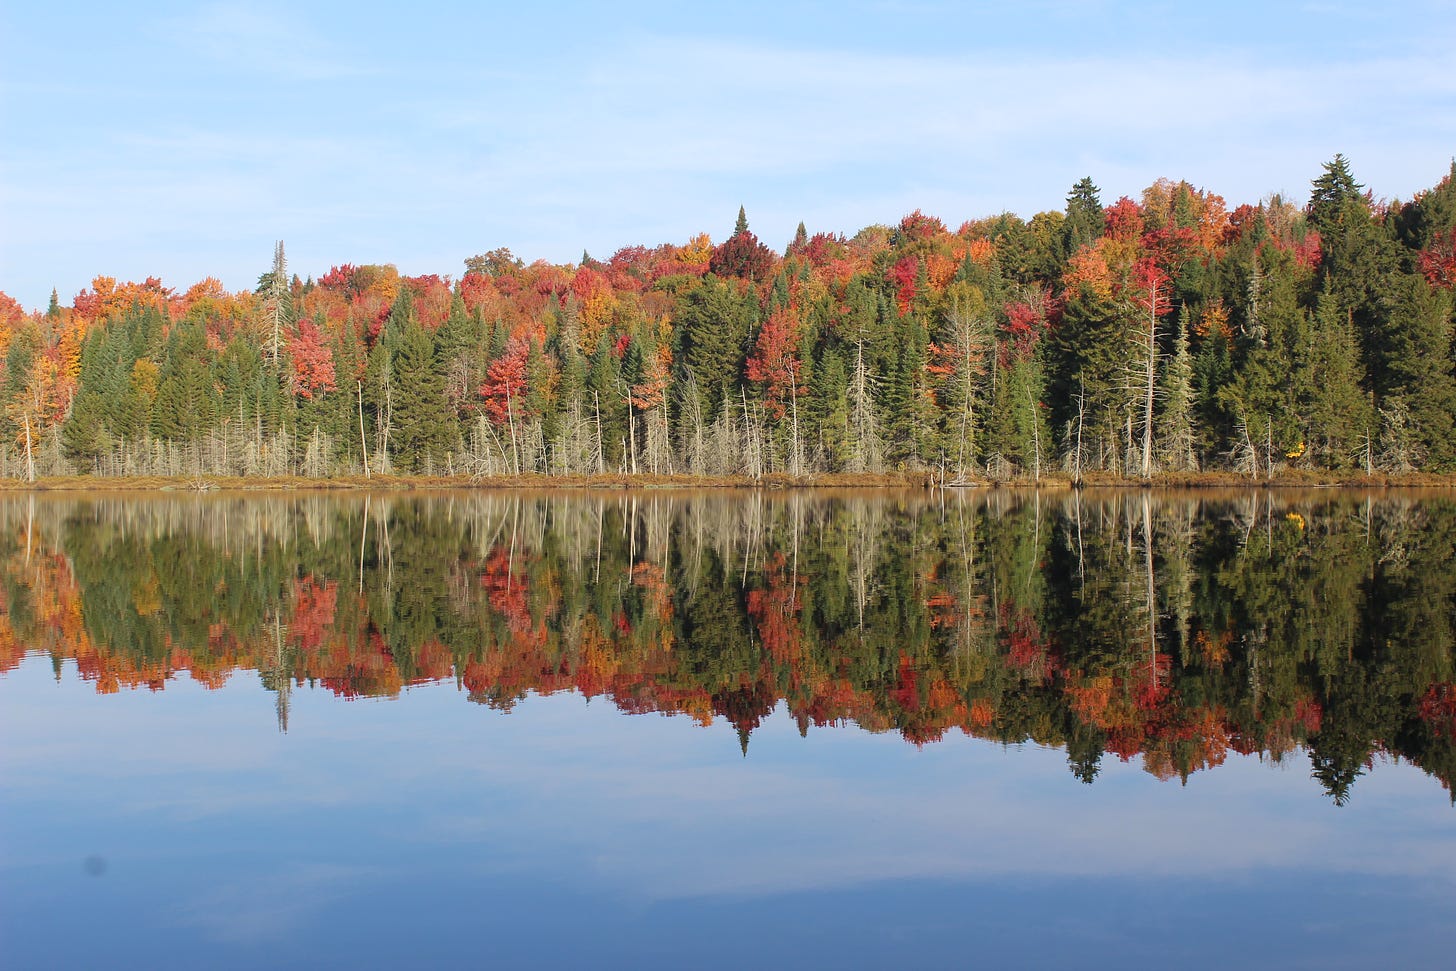 Dozens of trees are reflected in the still water of a small pond, with the leaves showing all sorts of shades of red and orange during fall foliage